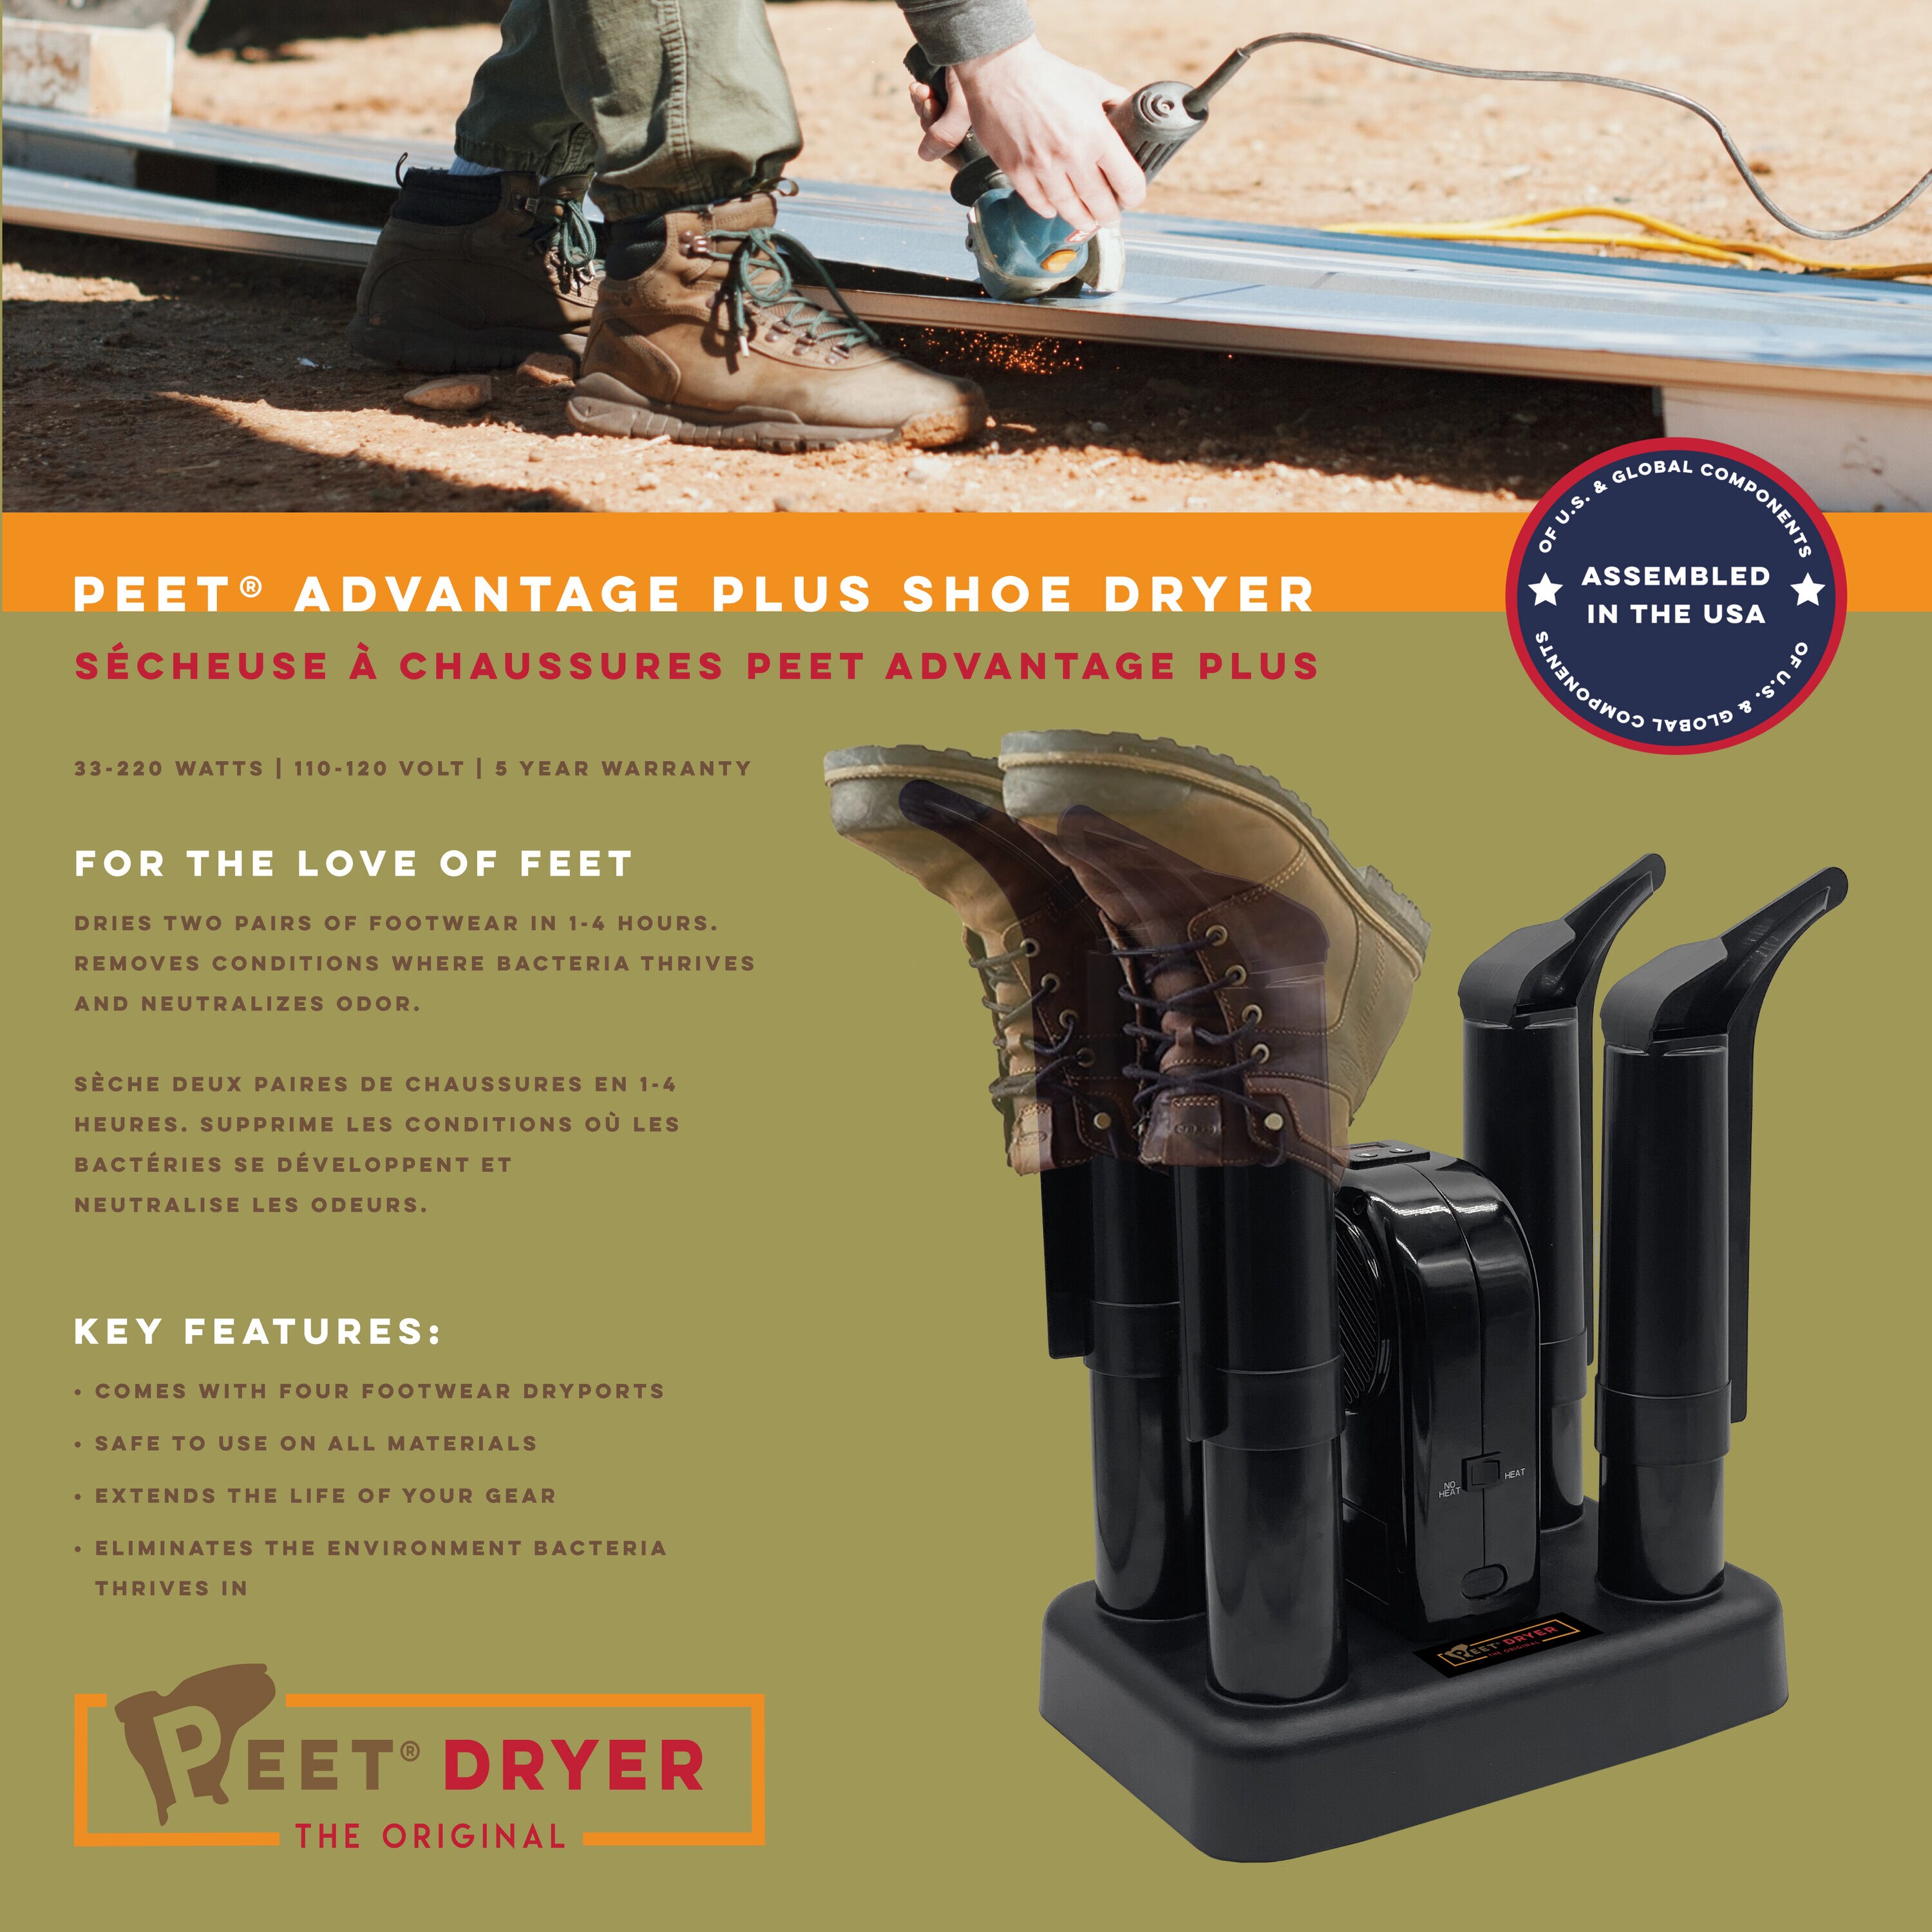 DryGuy Force DX Boot Dryer Review - Man Makes Fire